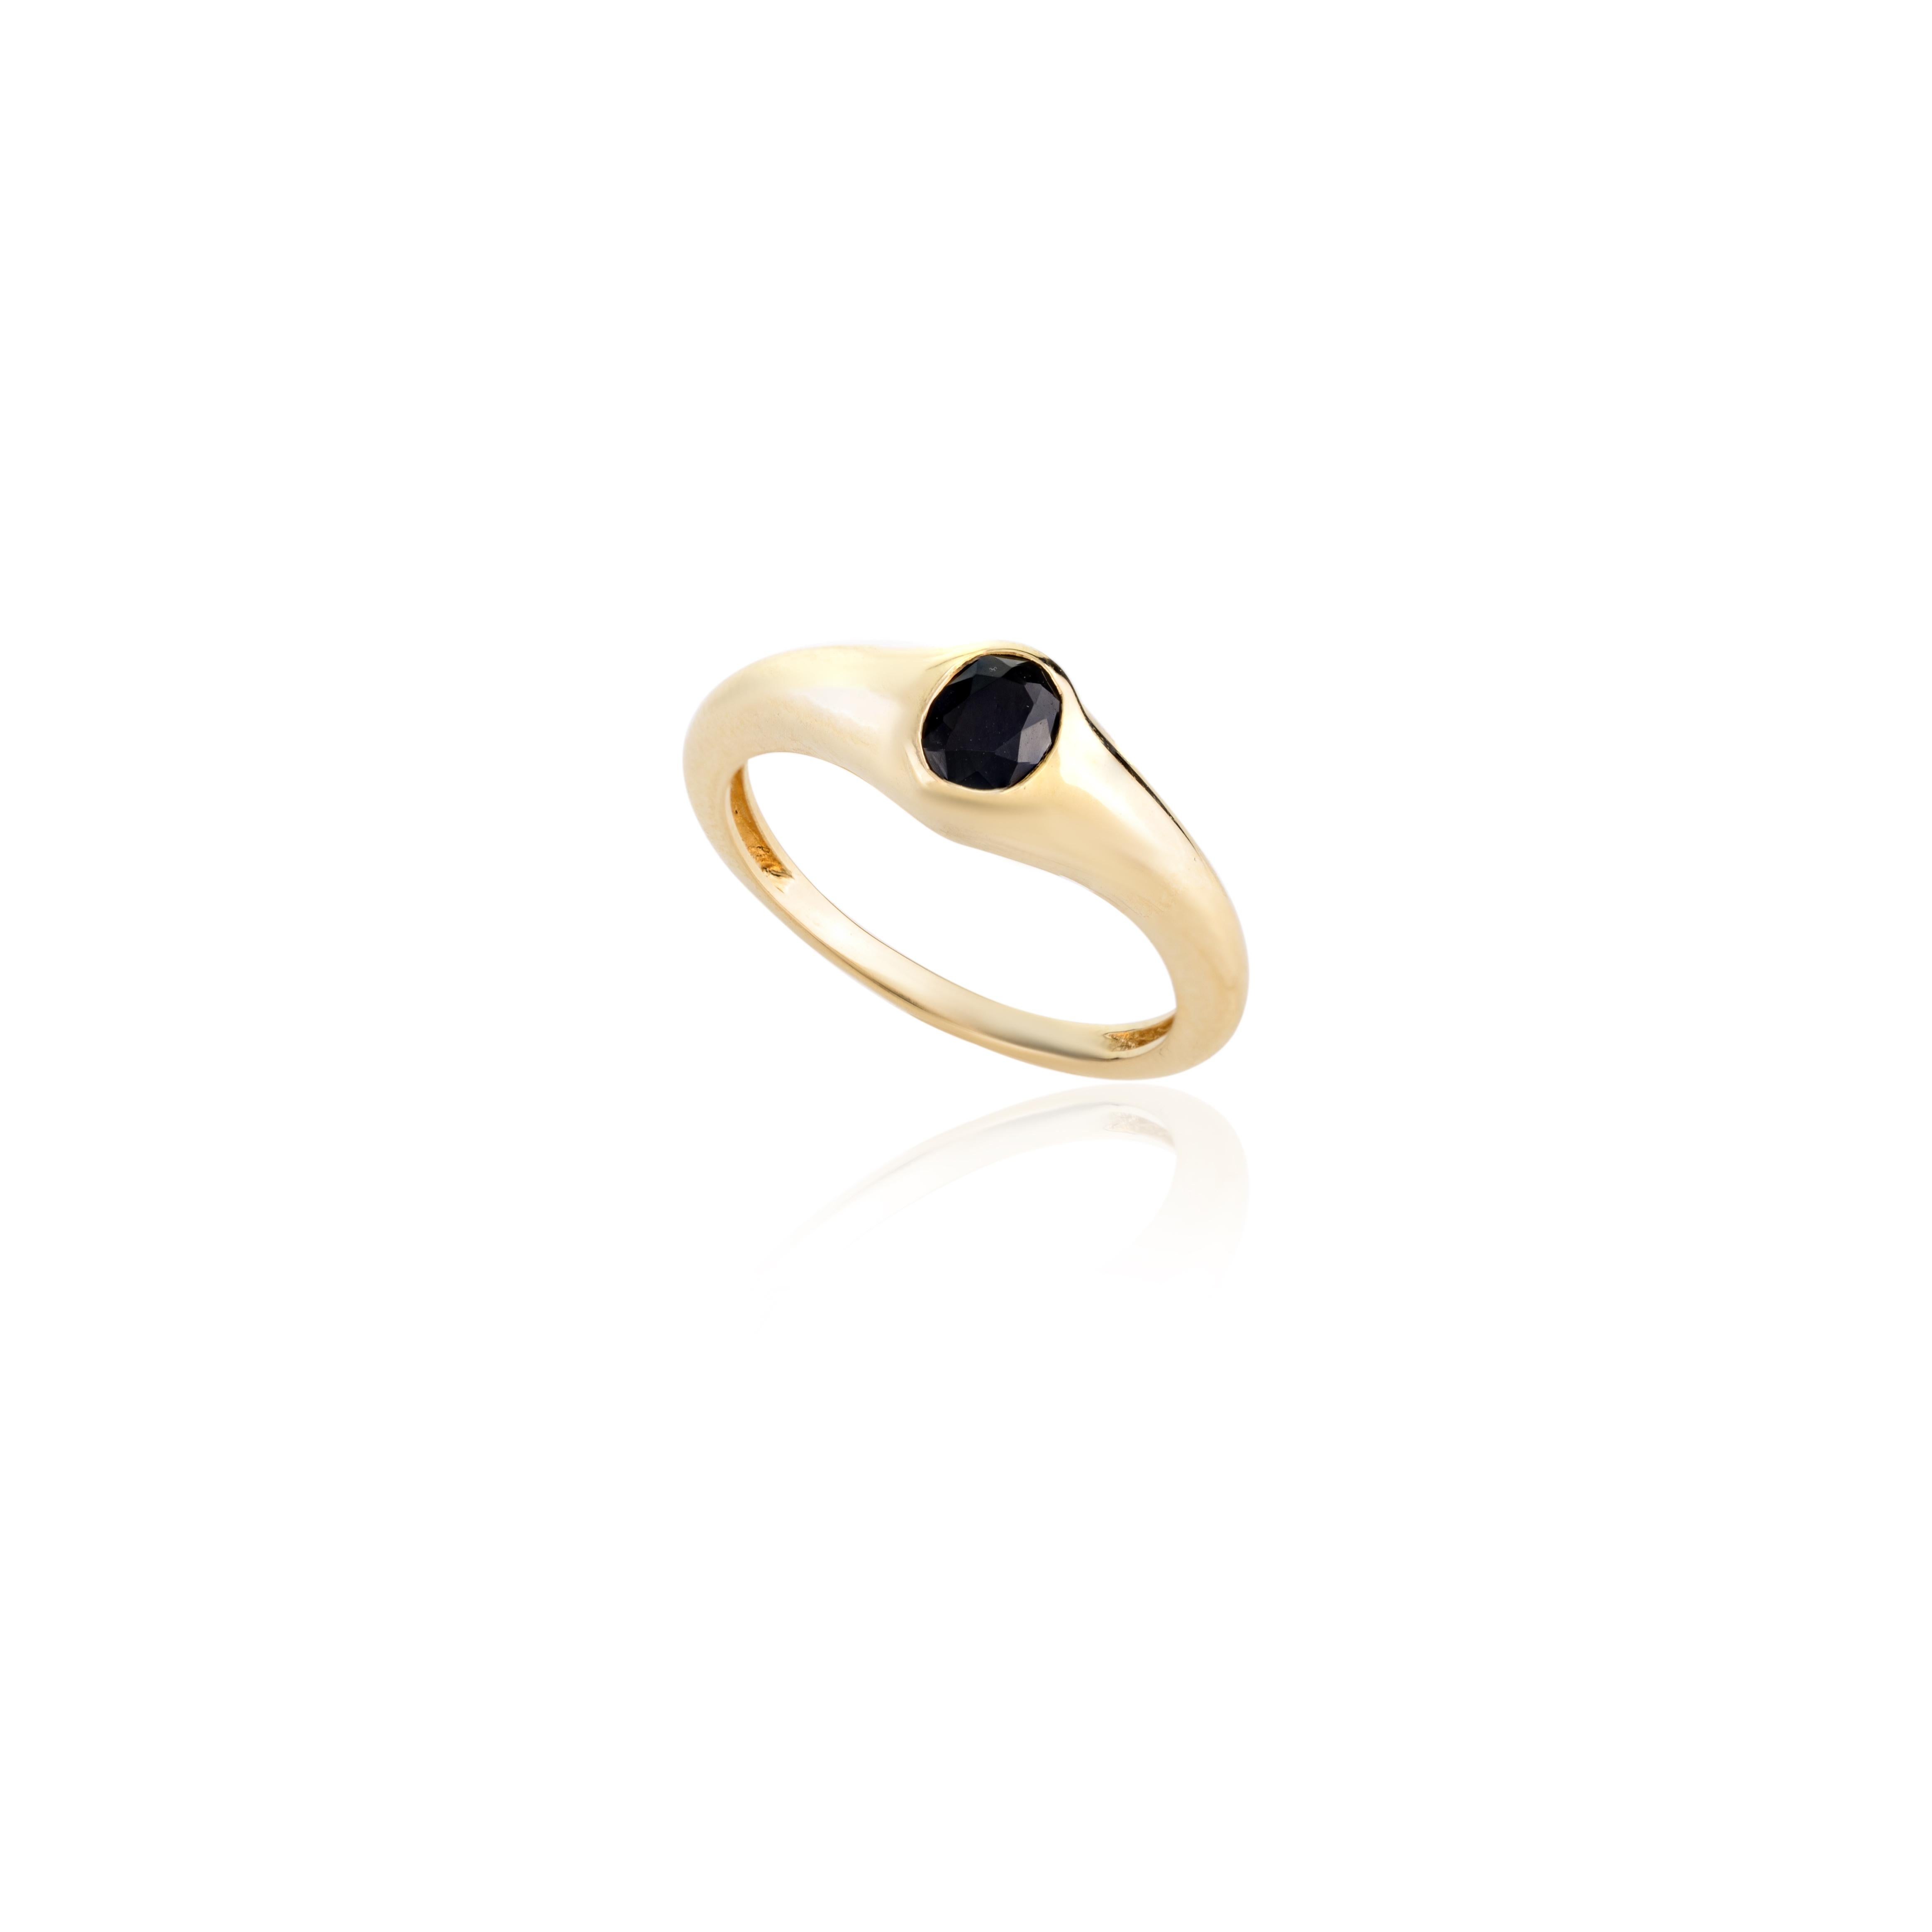 For Sale:  Unisex 14k Solid Yellow Gold Black Onyx Promise Everyday Ring 8